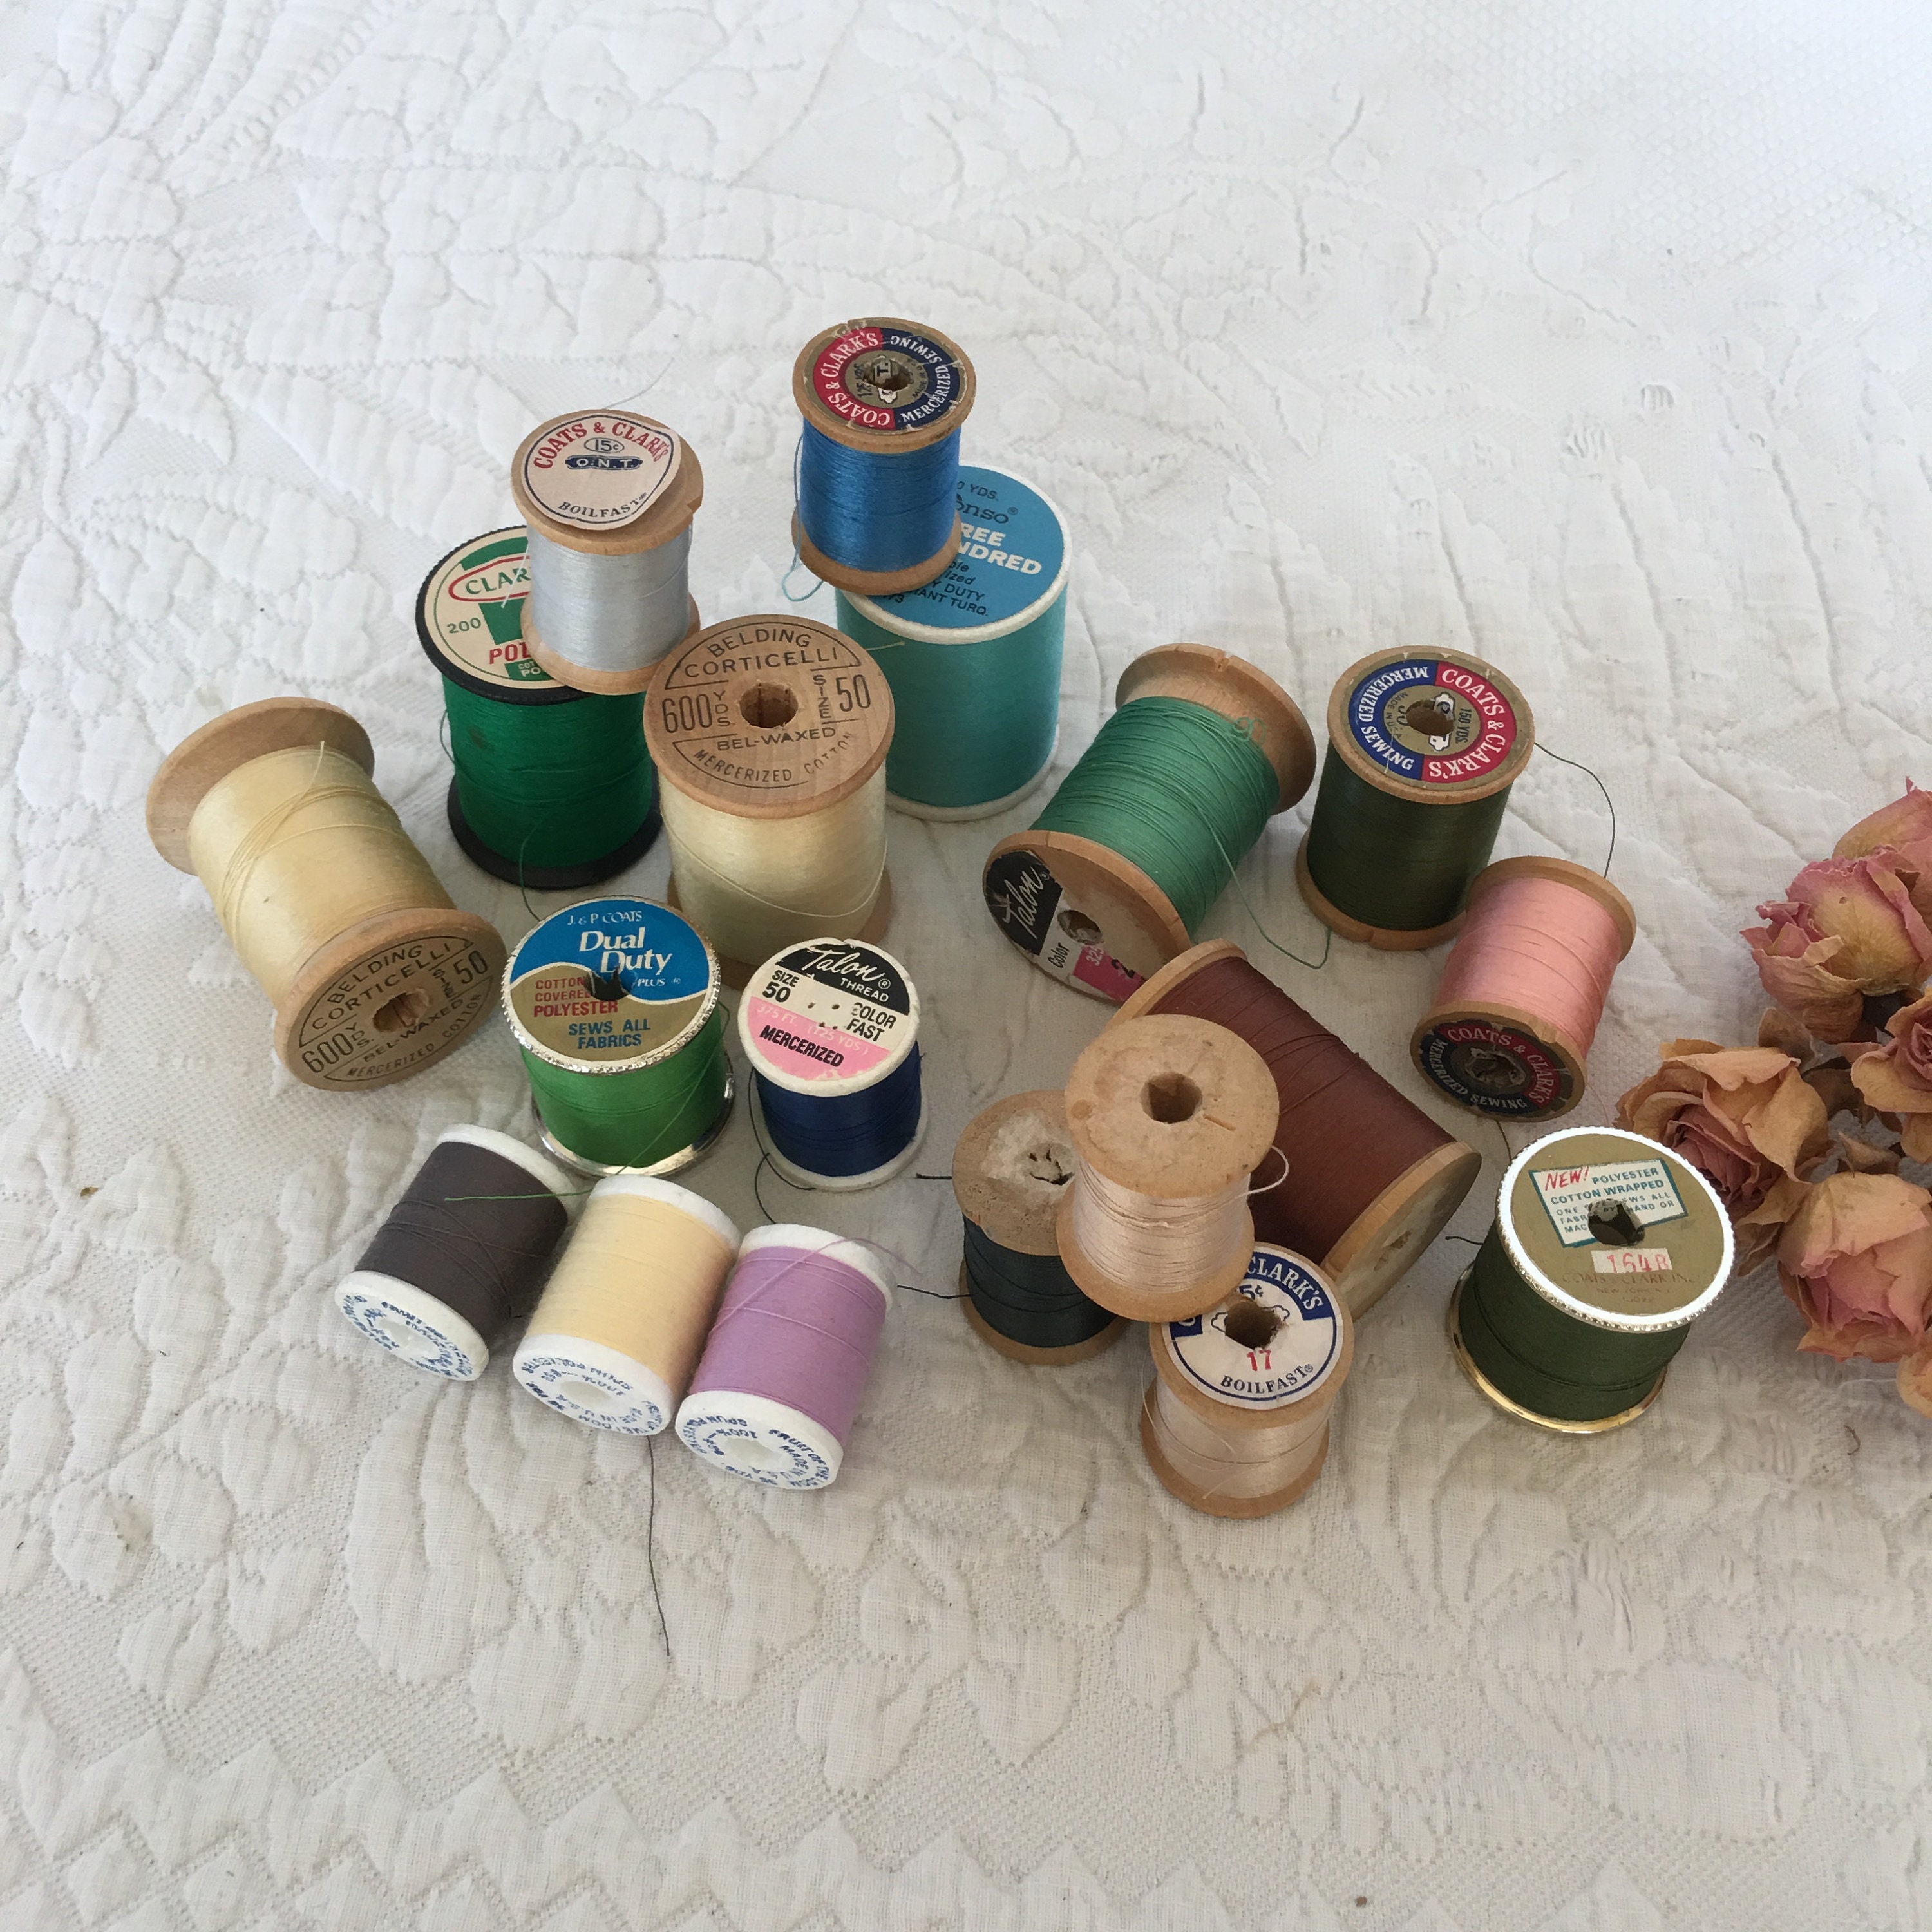 Vintage Lot of 4 Coats & Clark Boilfast Sewing Thread-Wooden Spools